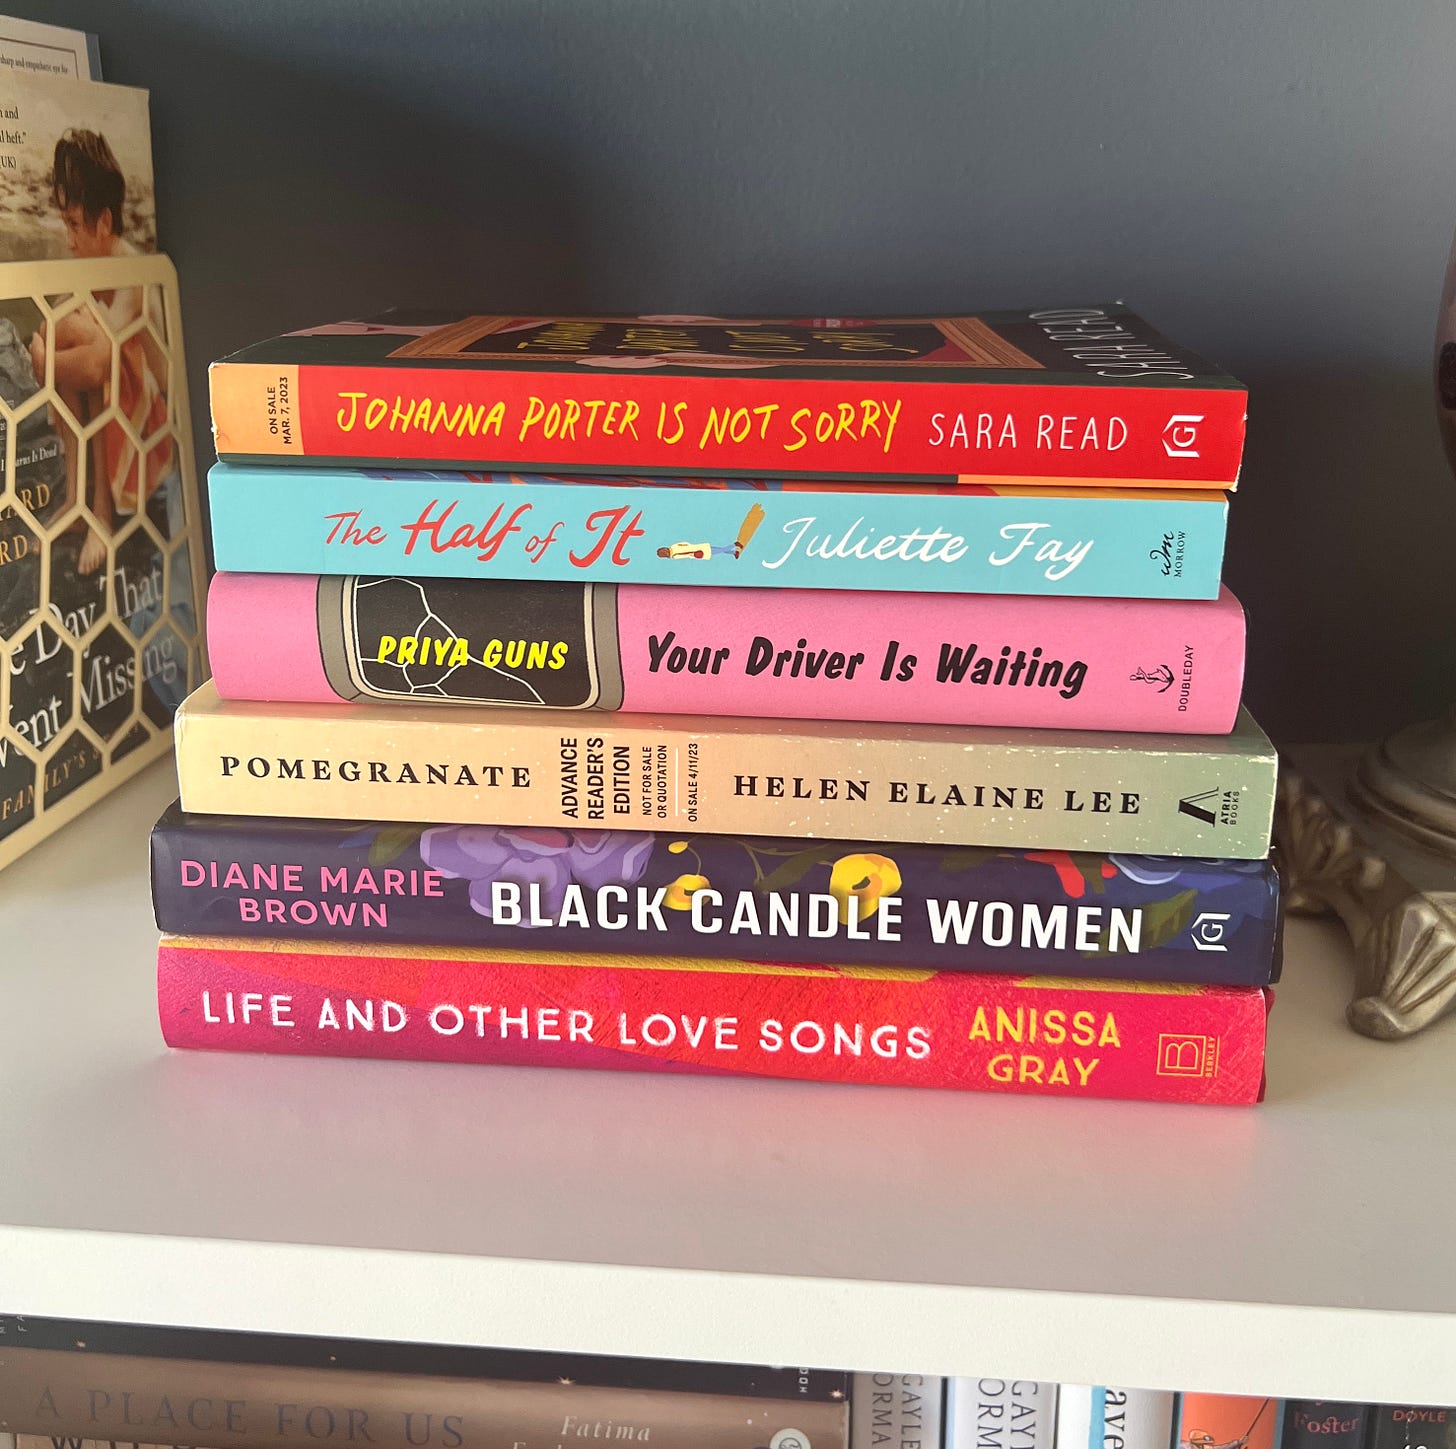 A stack of books featuring Johanna Porter Is Not Sorry, The Half of It, Your Driver Is Waiting, Pomegranate, Black Candle Women, and Life and Other Love Songs